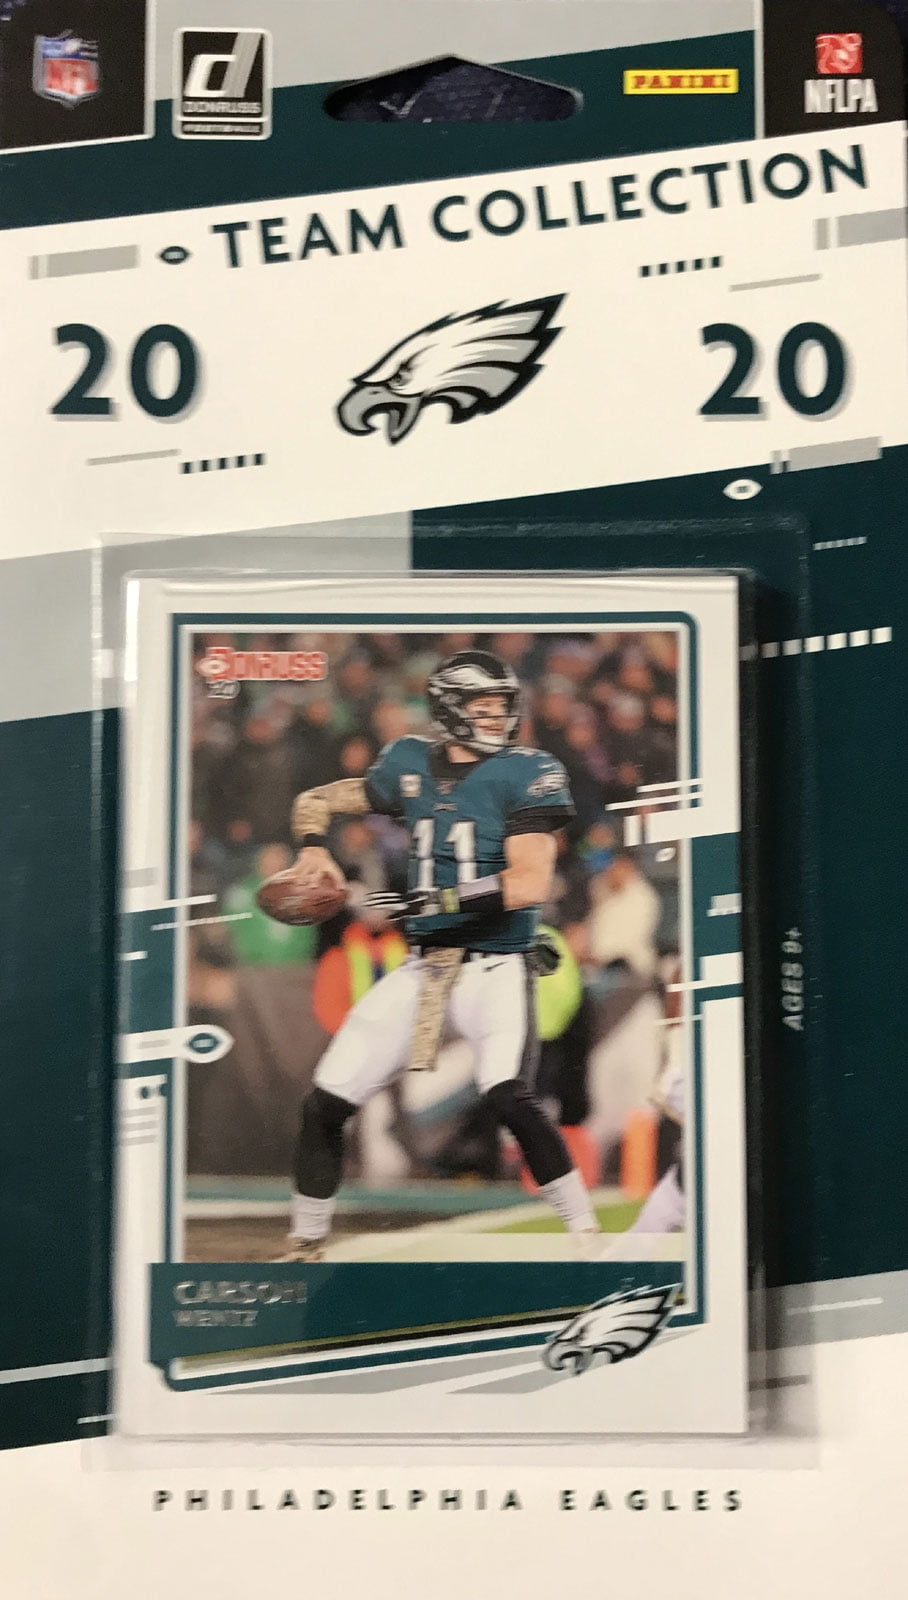 Denver Broncos 2020 Donruss Factory 12 Card Team Set with Von Miller Rated Rookies of Jerry Jeudy and KJ Hamler Plus 8 Other Cards Peyton Manning